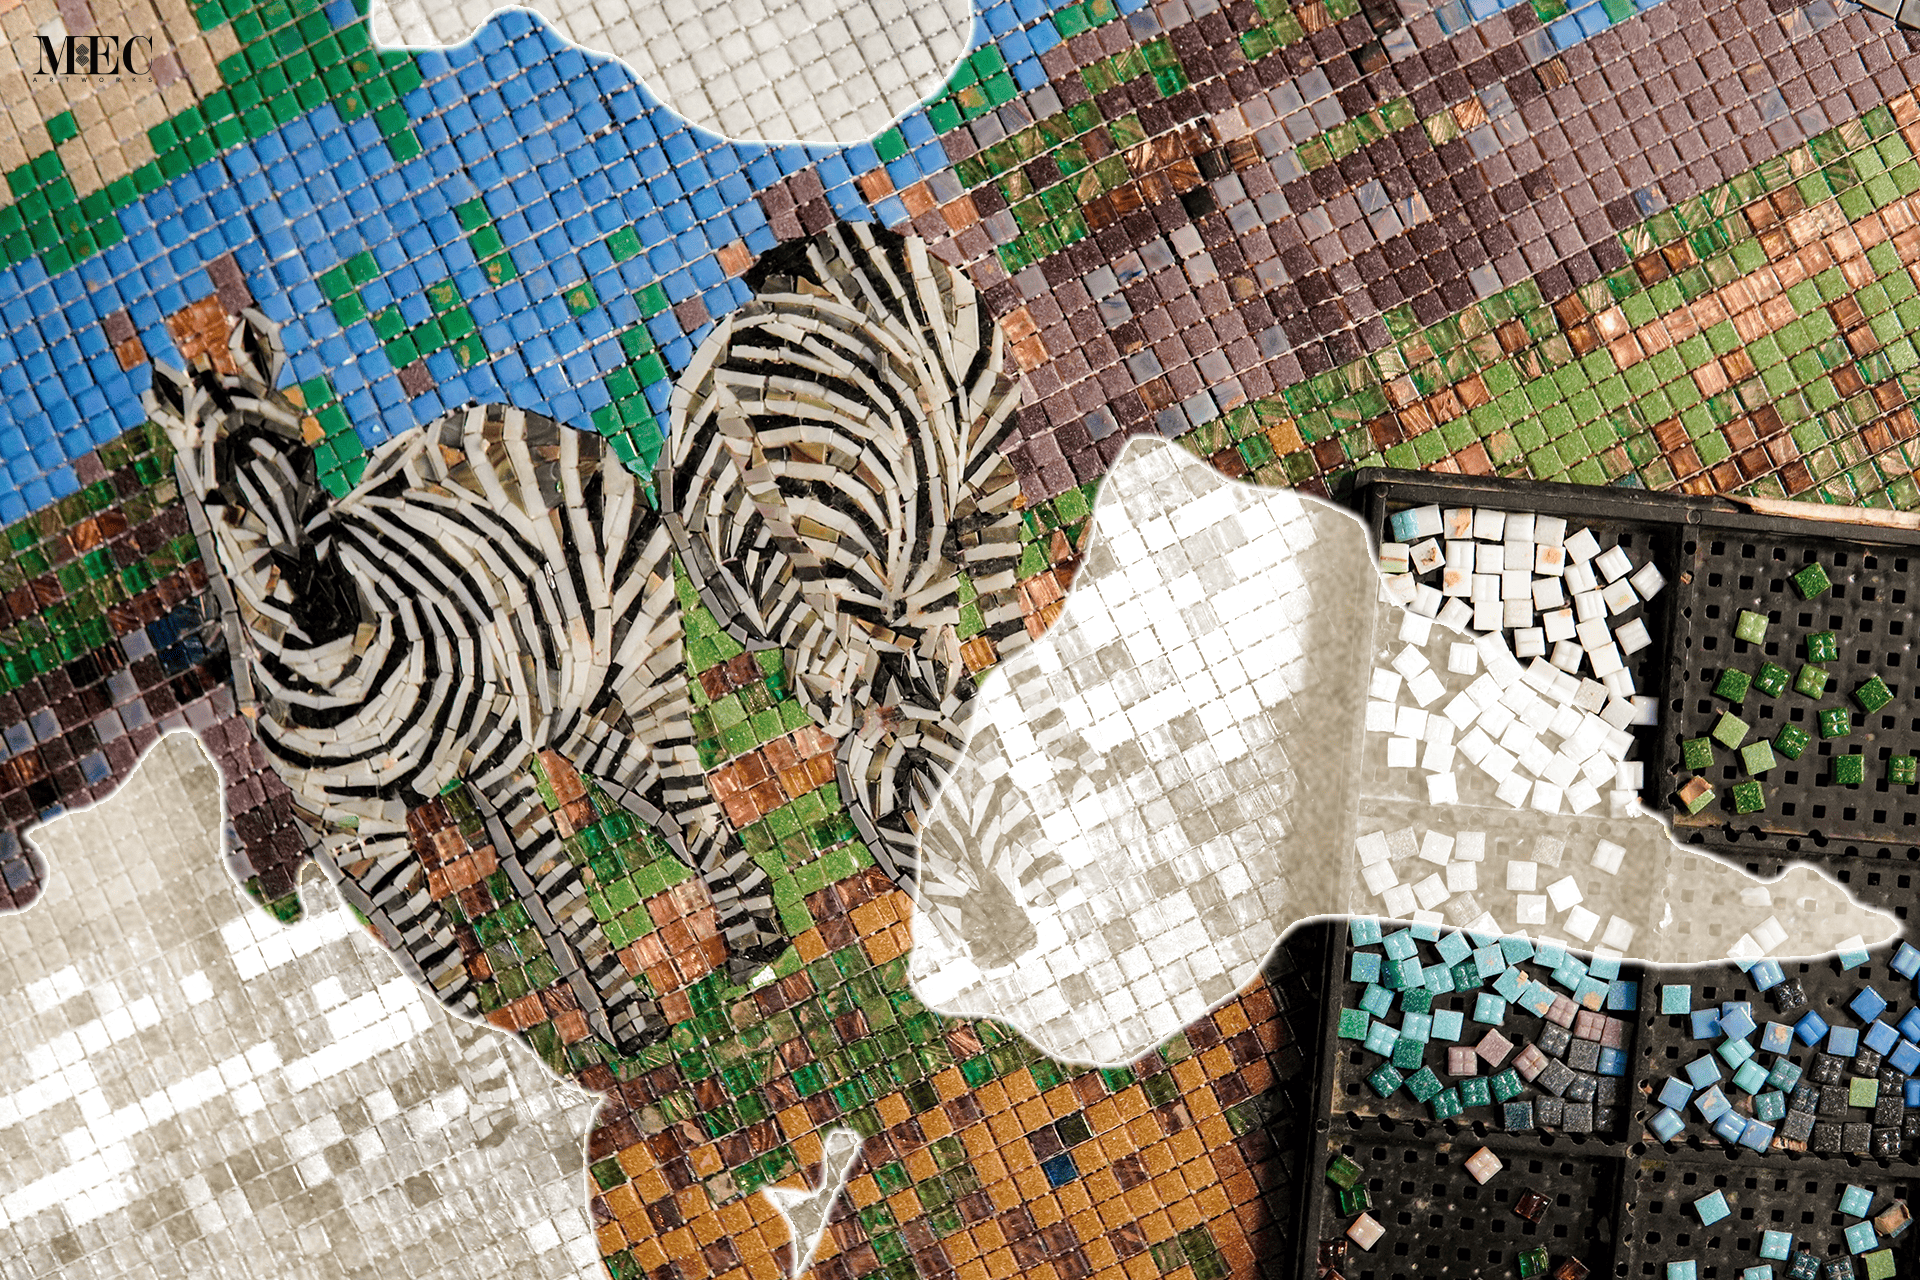 Two zebras emerge from the canvas—a striking dance of monochrome elegance against a vivid mosaic backdrop. The artist’s meticulous craftsmanship captures every detail of their iconic striped coats, while vibrant shades of green evoke the lush grasslands where these majestic creatures roam. 